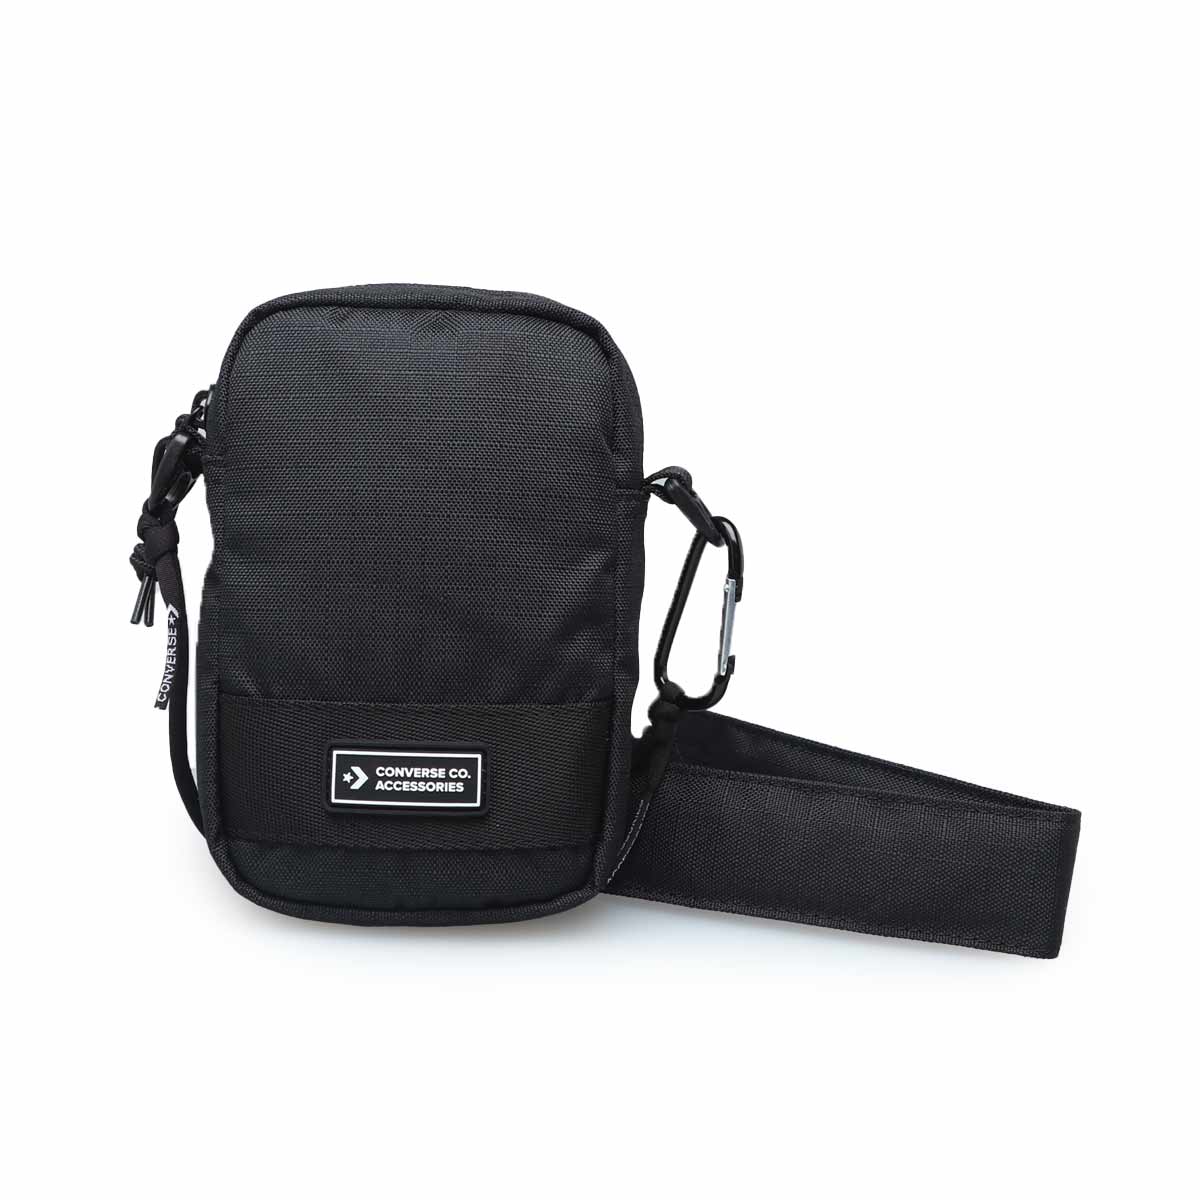 Converse Comms Pouch 2.0 crossbody bag in black